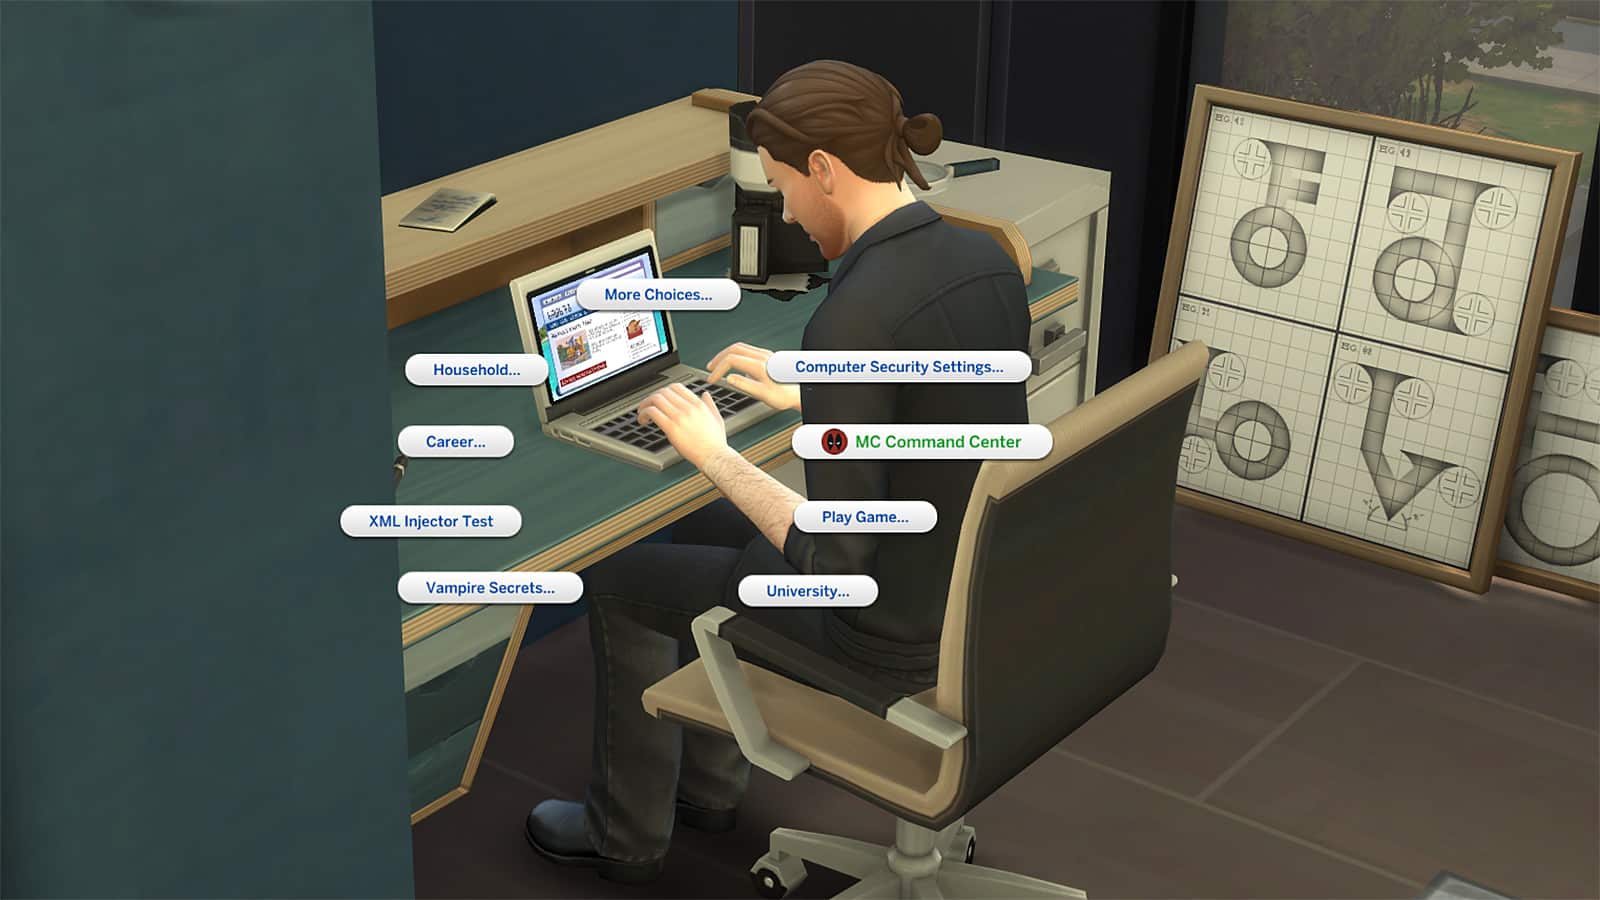 The Sims 4: Unlock all items on PlayStation, Xbox & PC - Dexerto